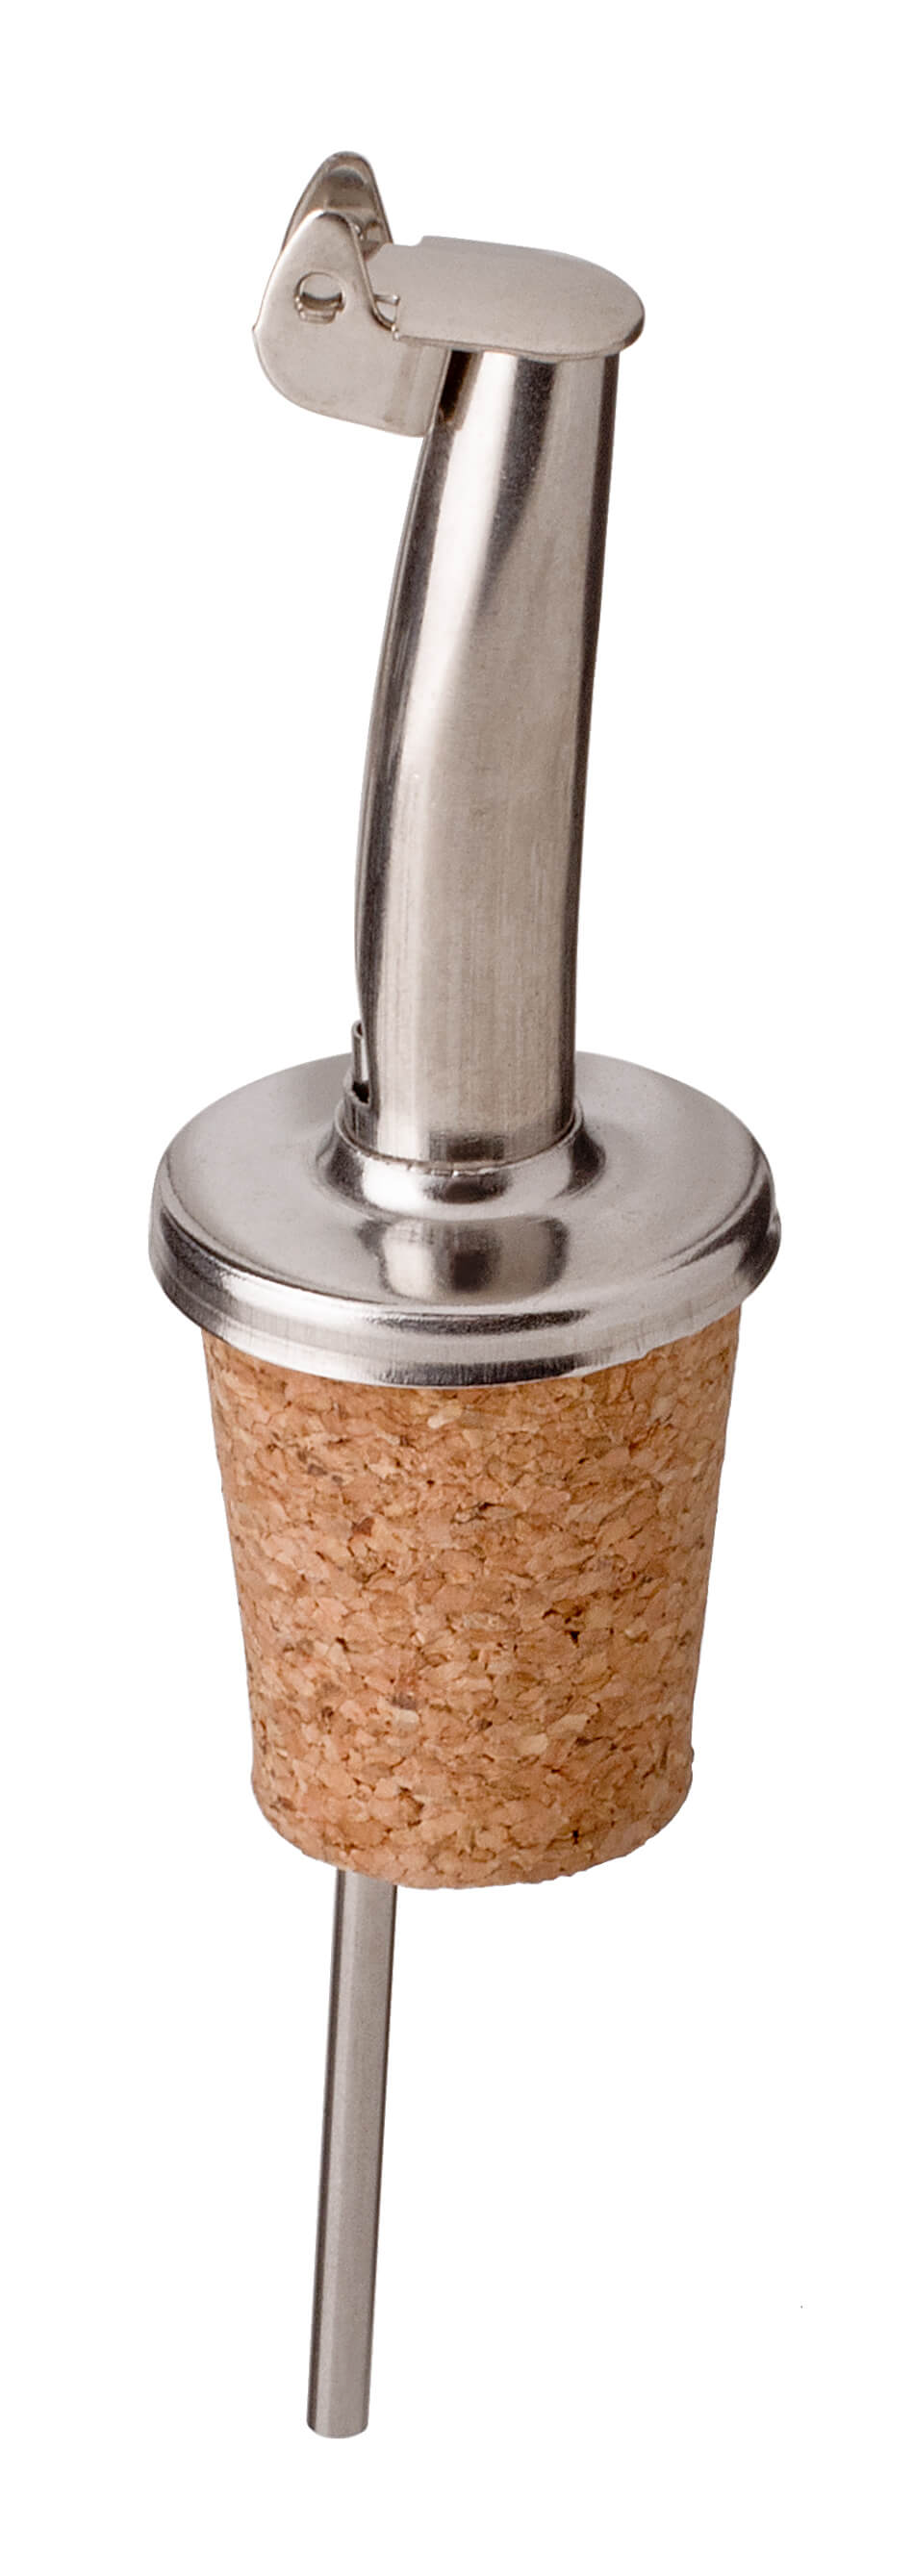 Pourer with cap - metal, natural cork (very slow)